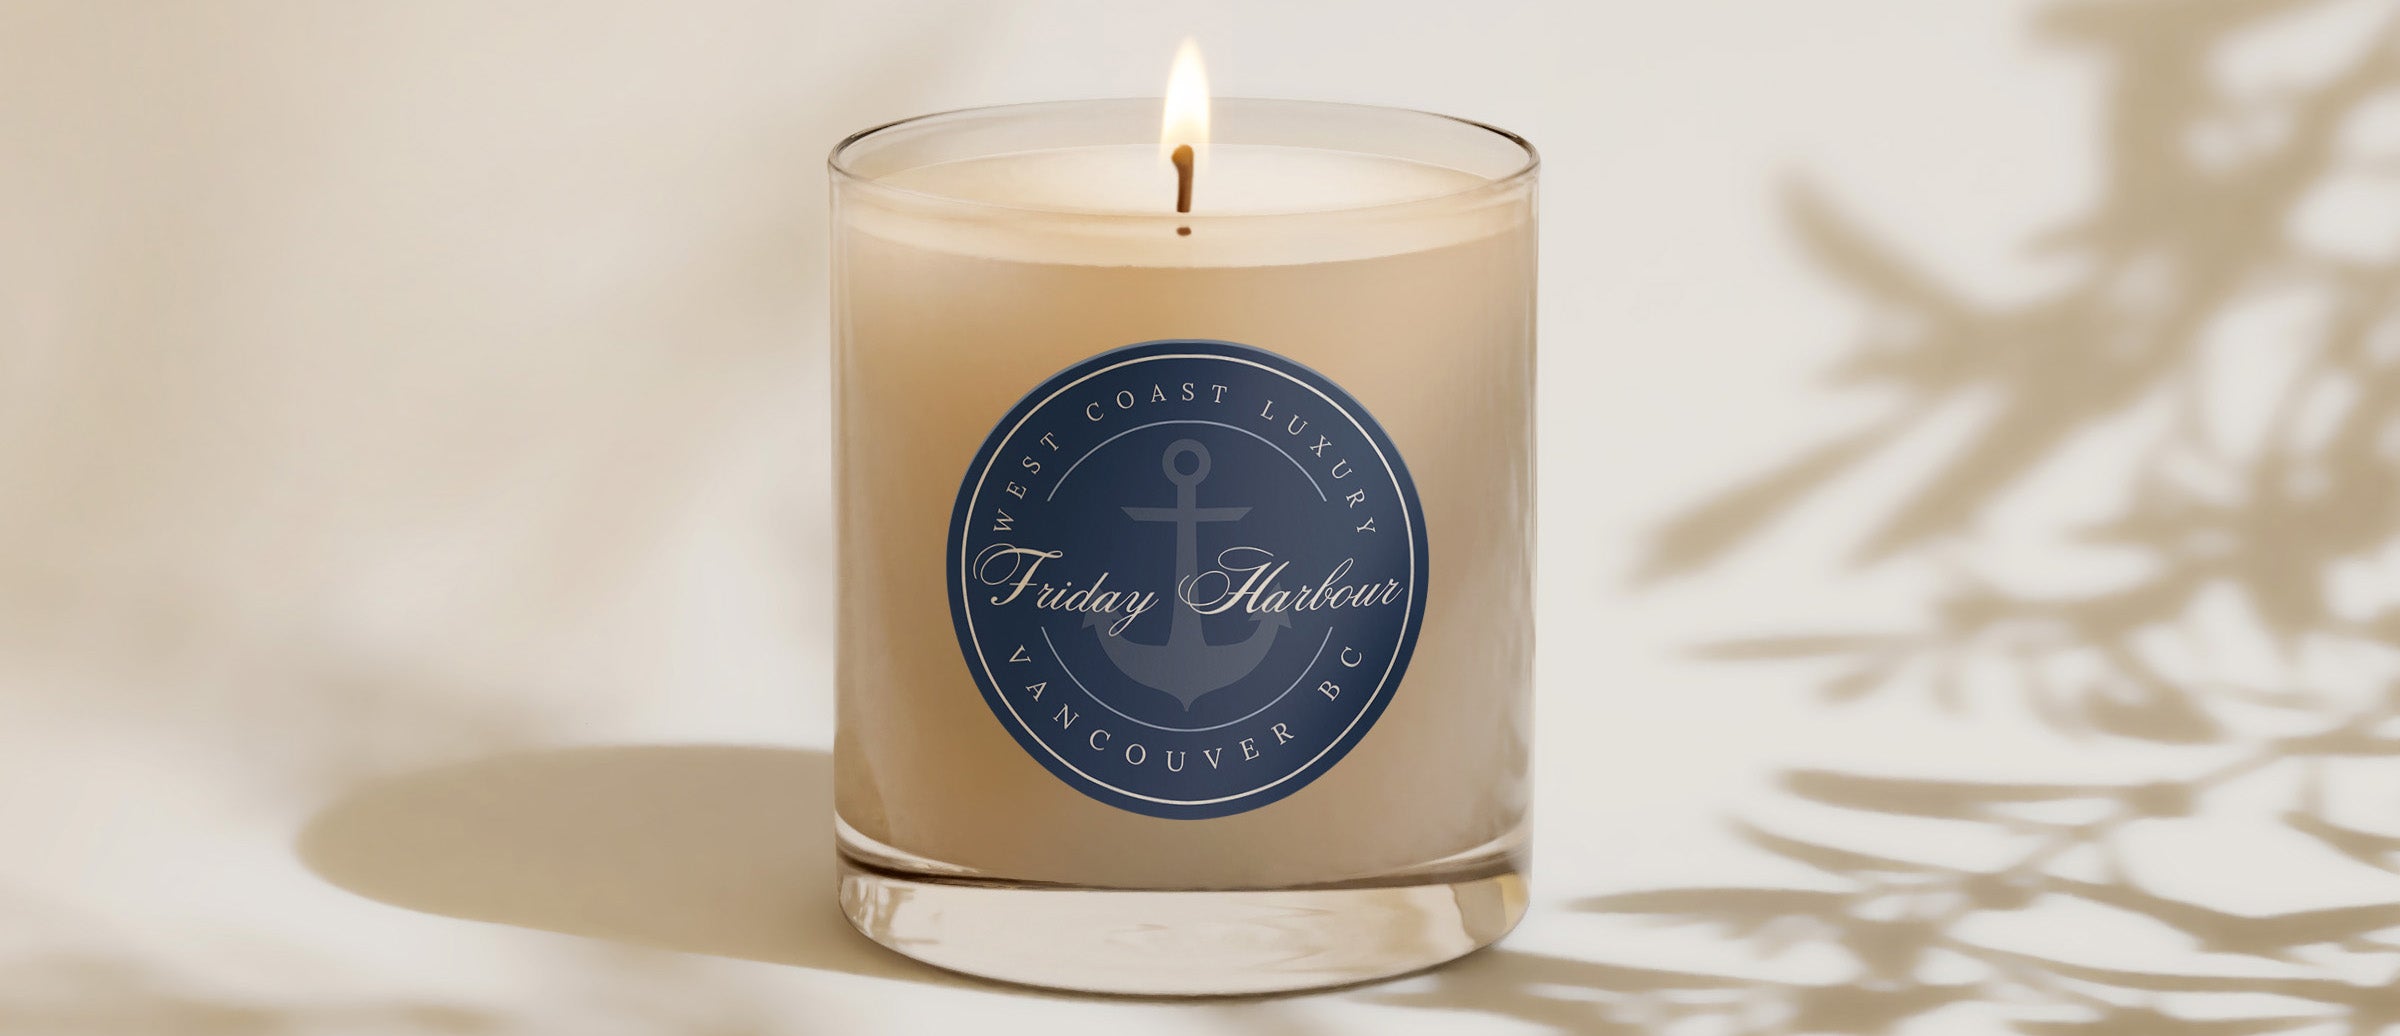 The Friday Harbour Lifestyle Company Scented Candle